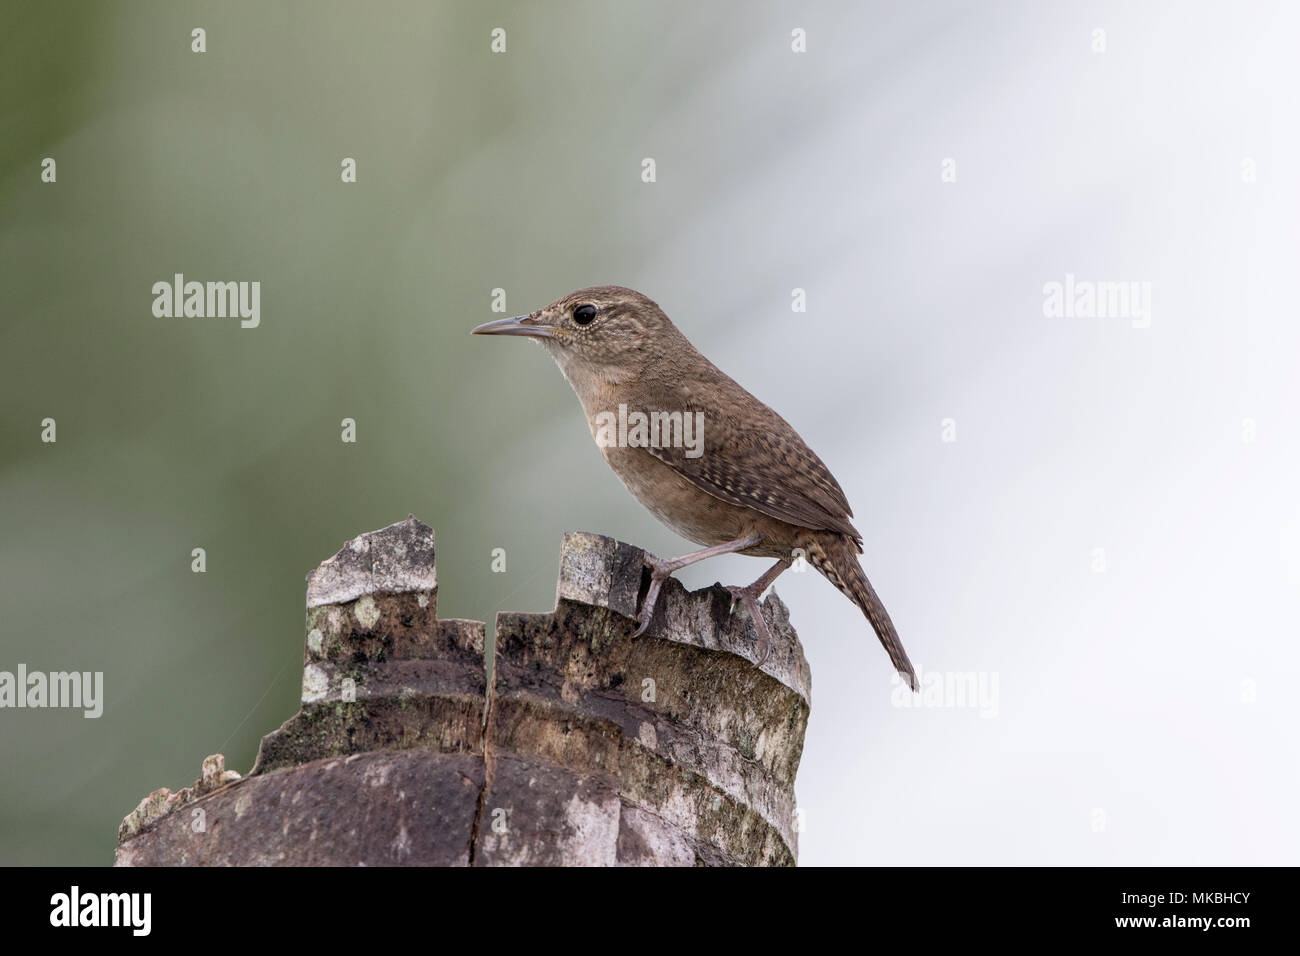 adult house wren Troglodytes aedon perched on dead palm tree, Costa Rica Stock Photo